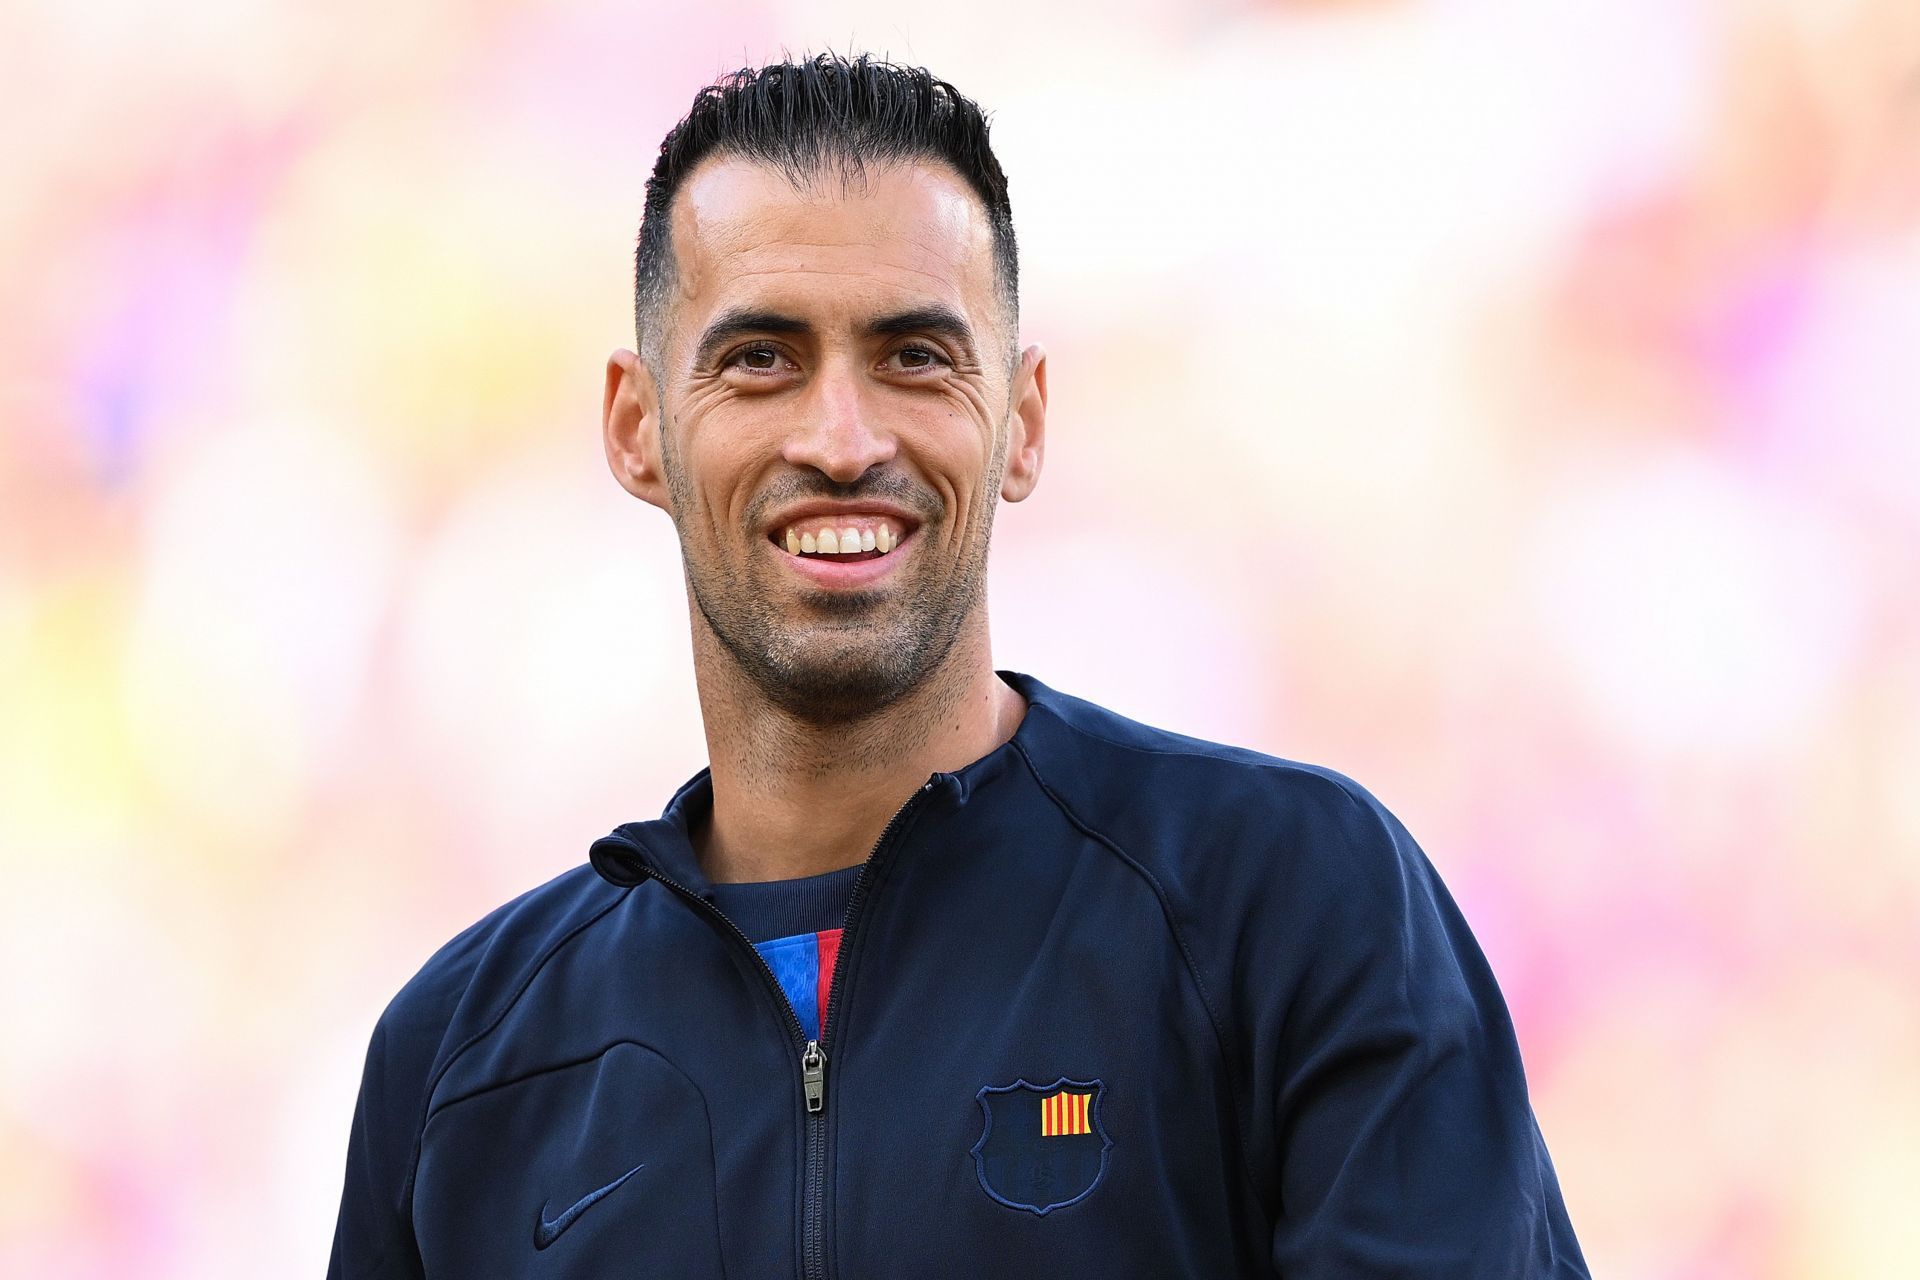 Busquets started his career at Barcelona under Guardiola.